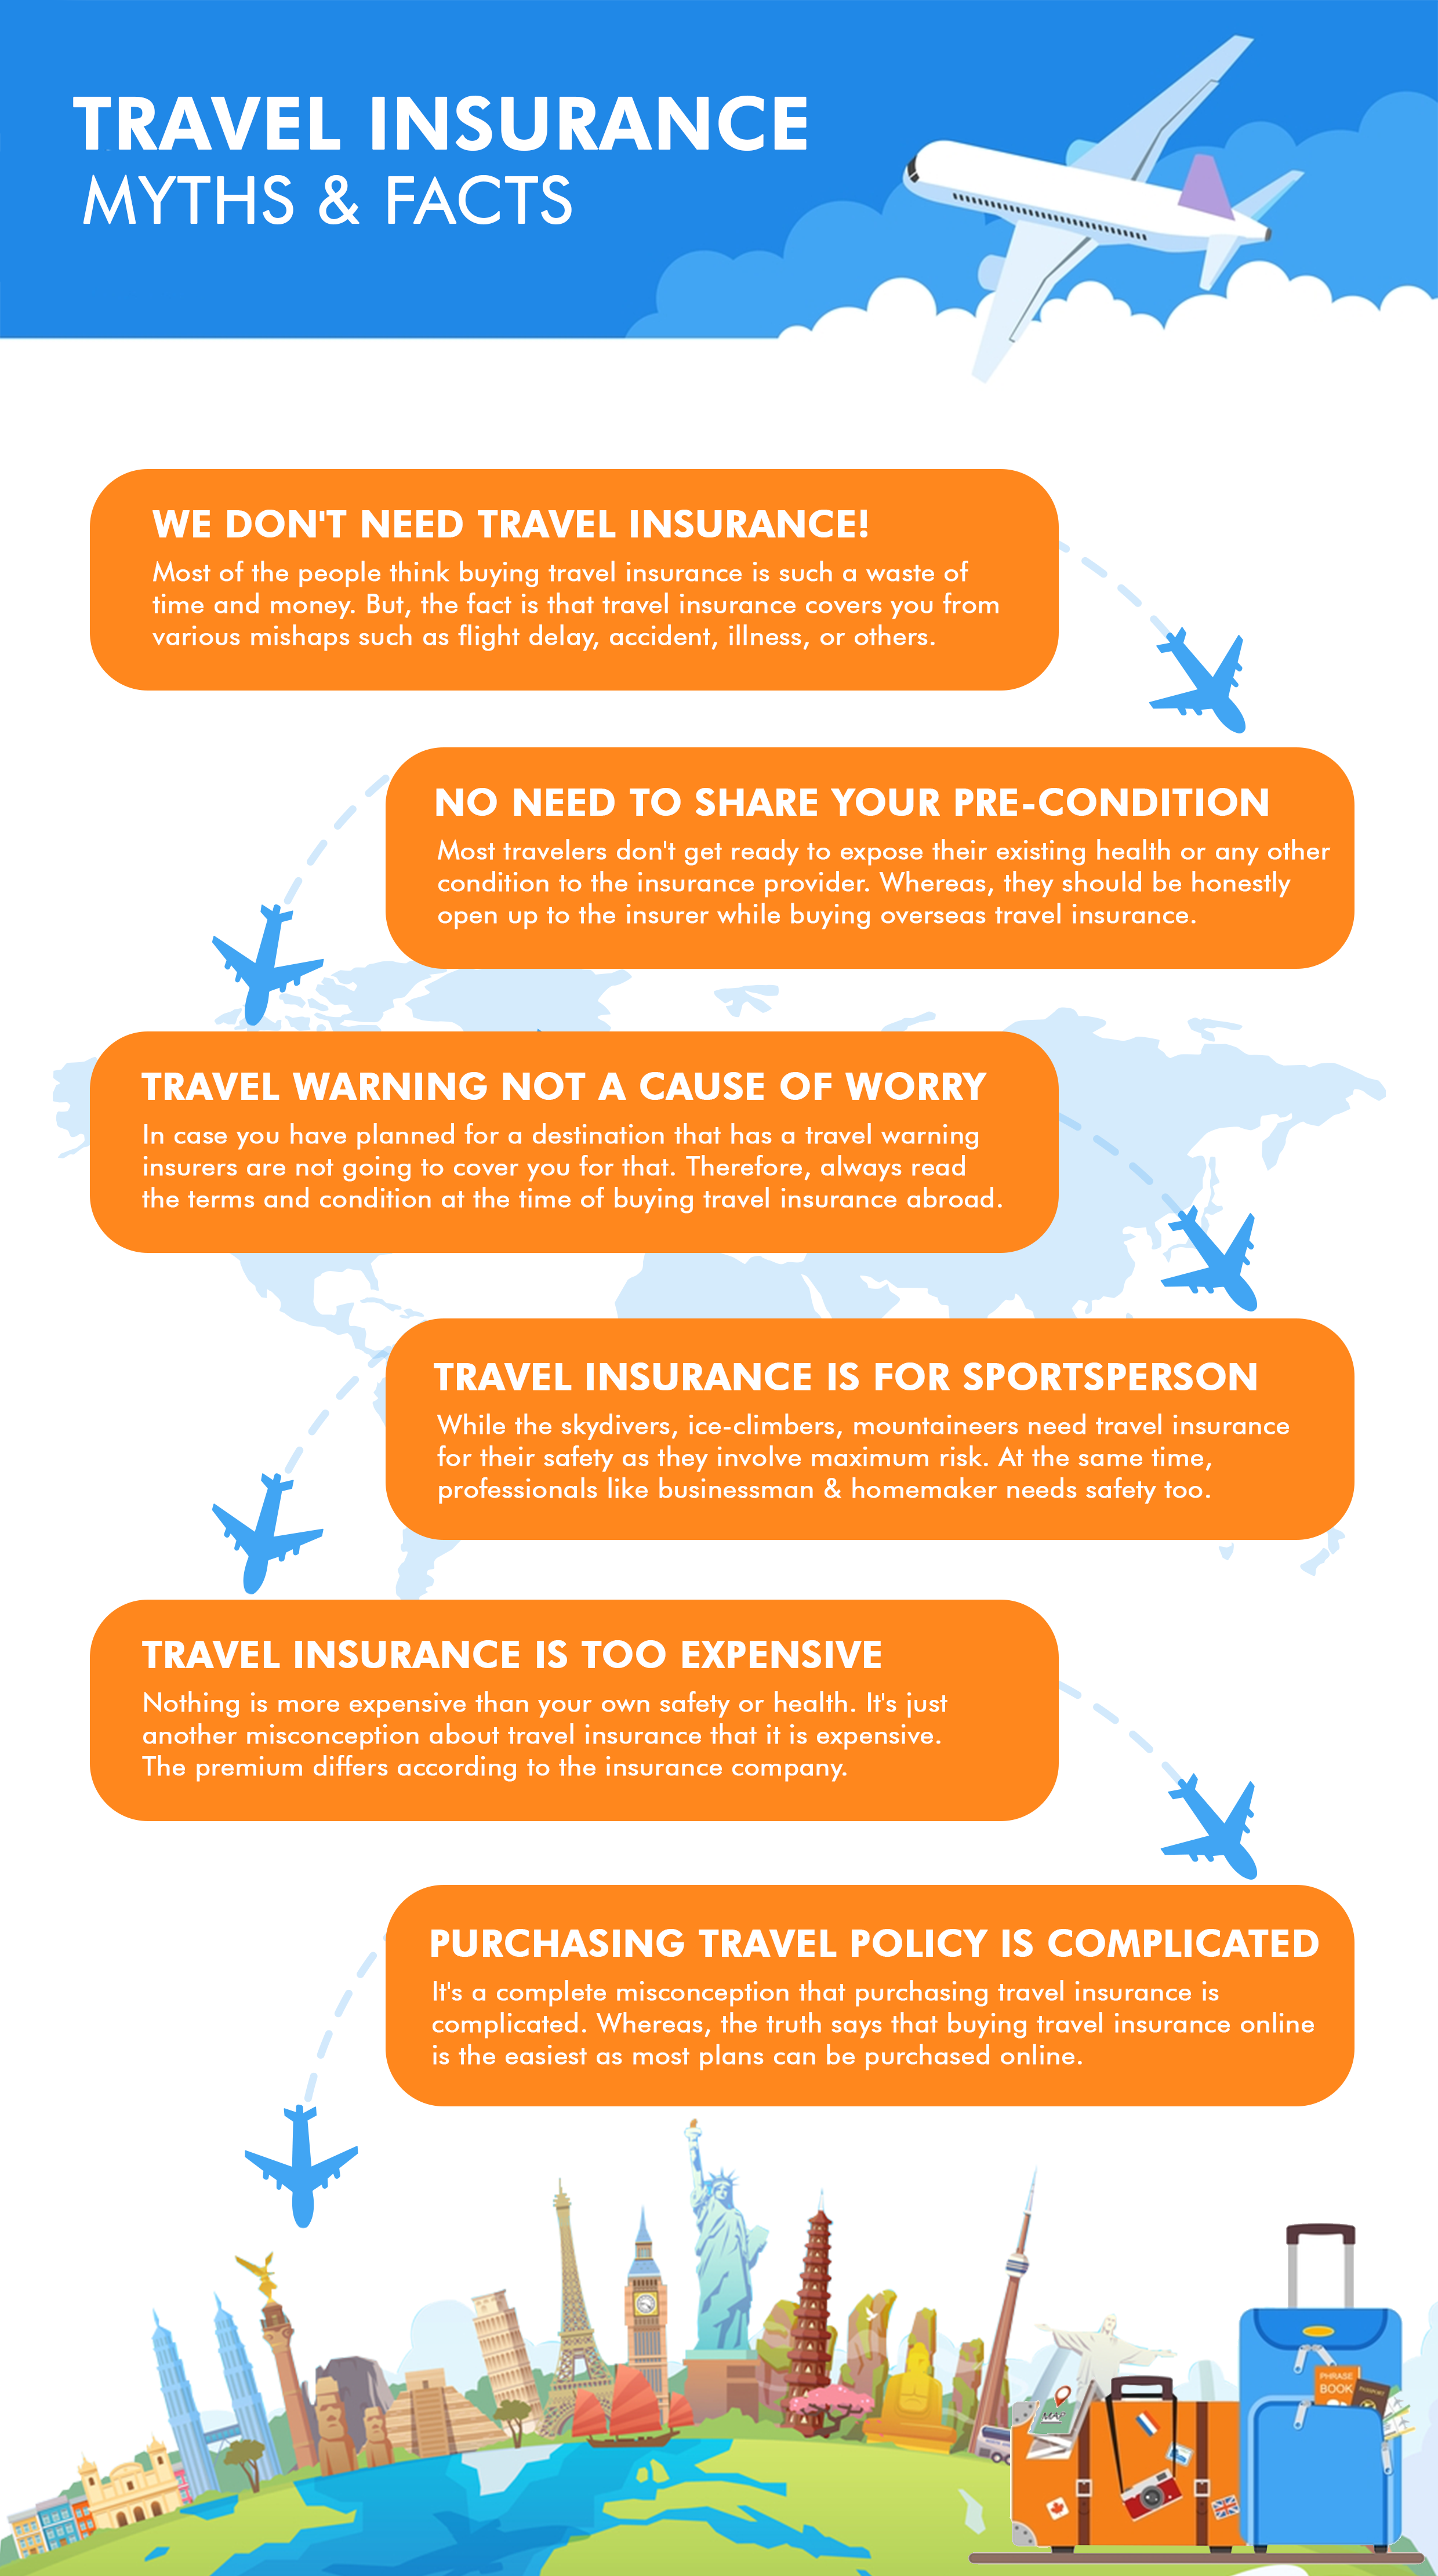 Travel insurance myths and facts